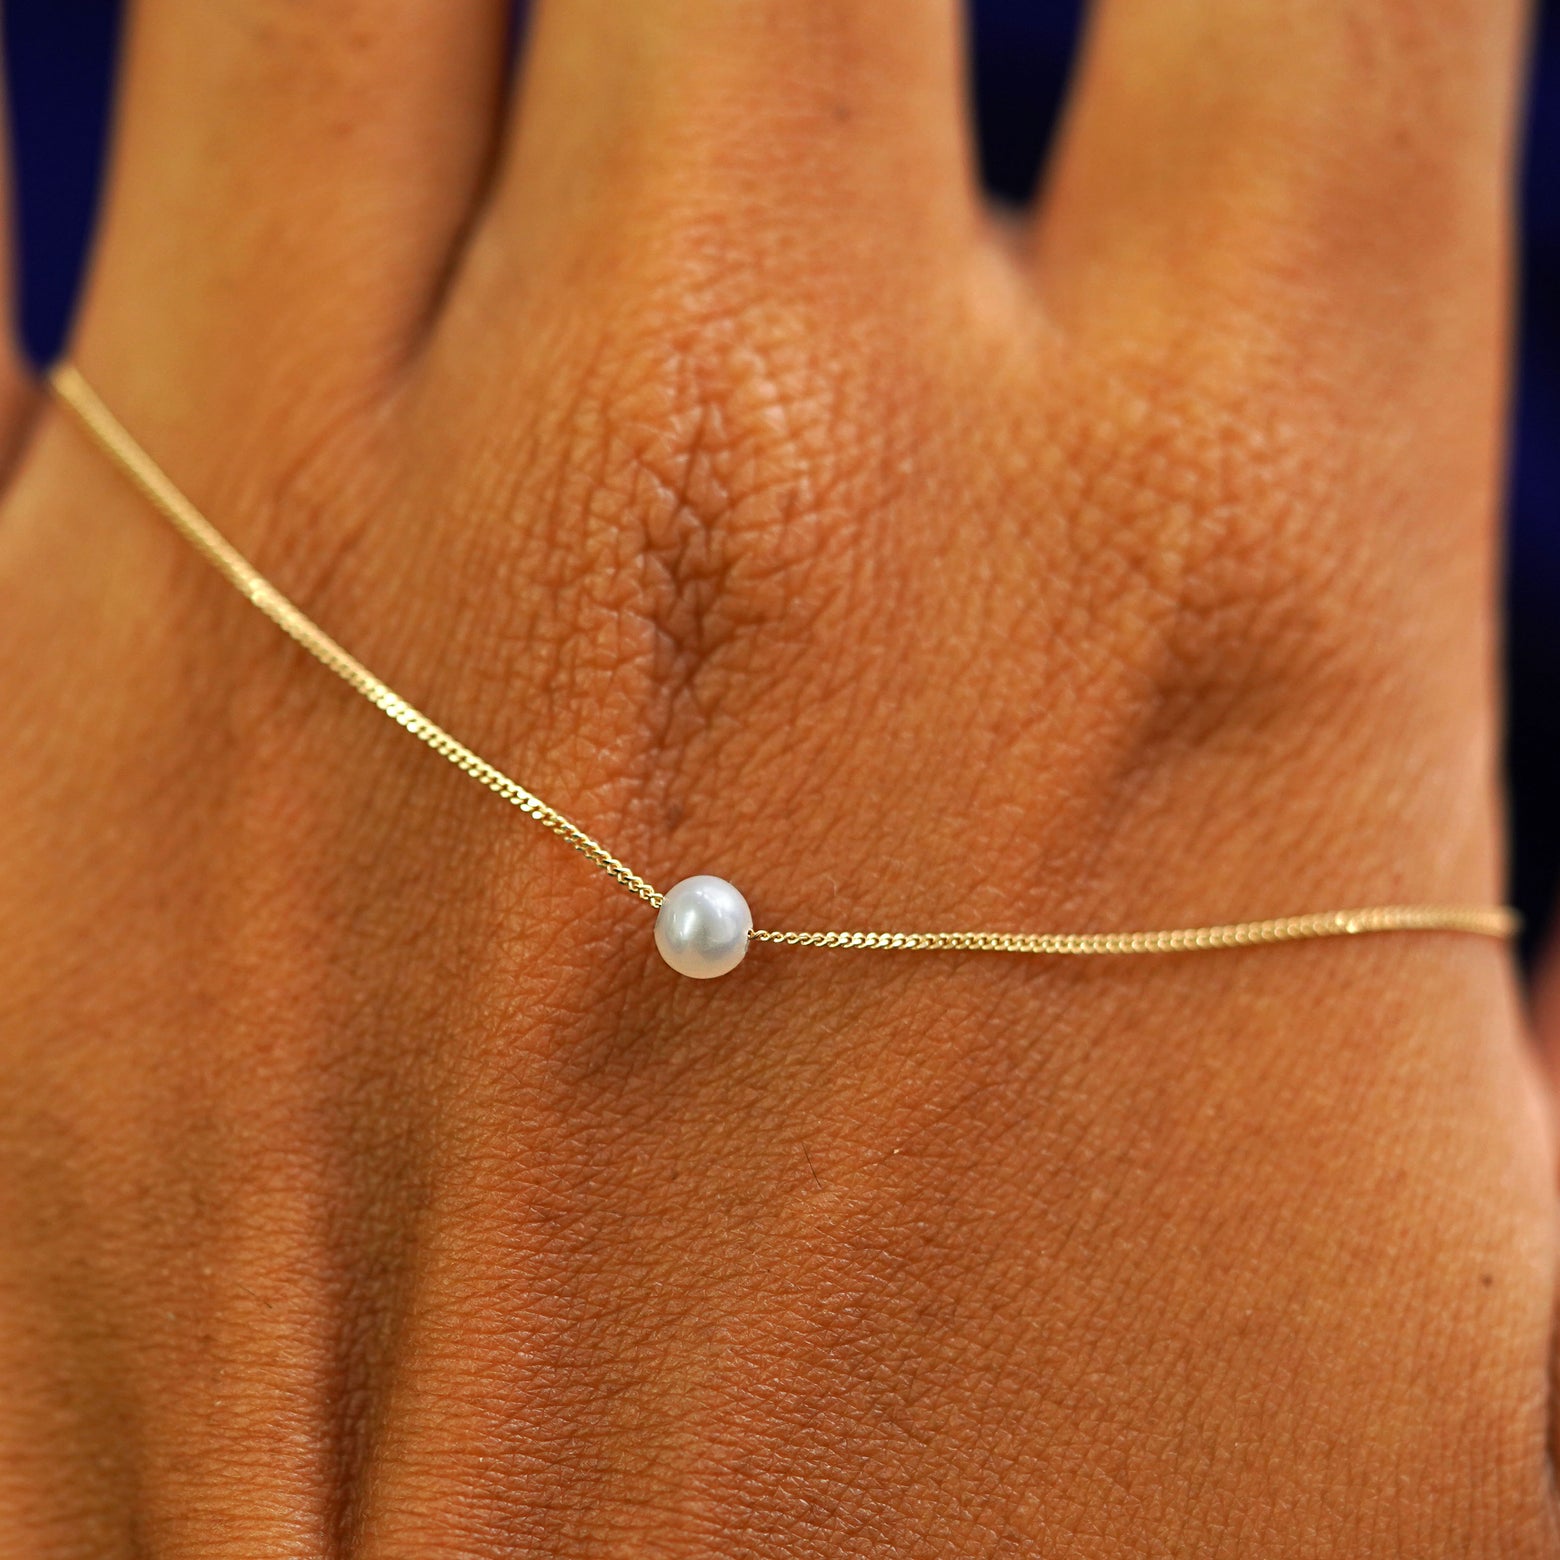 A 4mm pearl slide necklace resting on the back of a model's hand